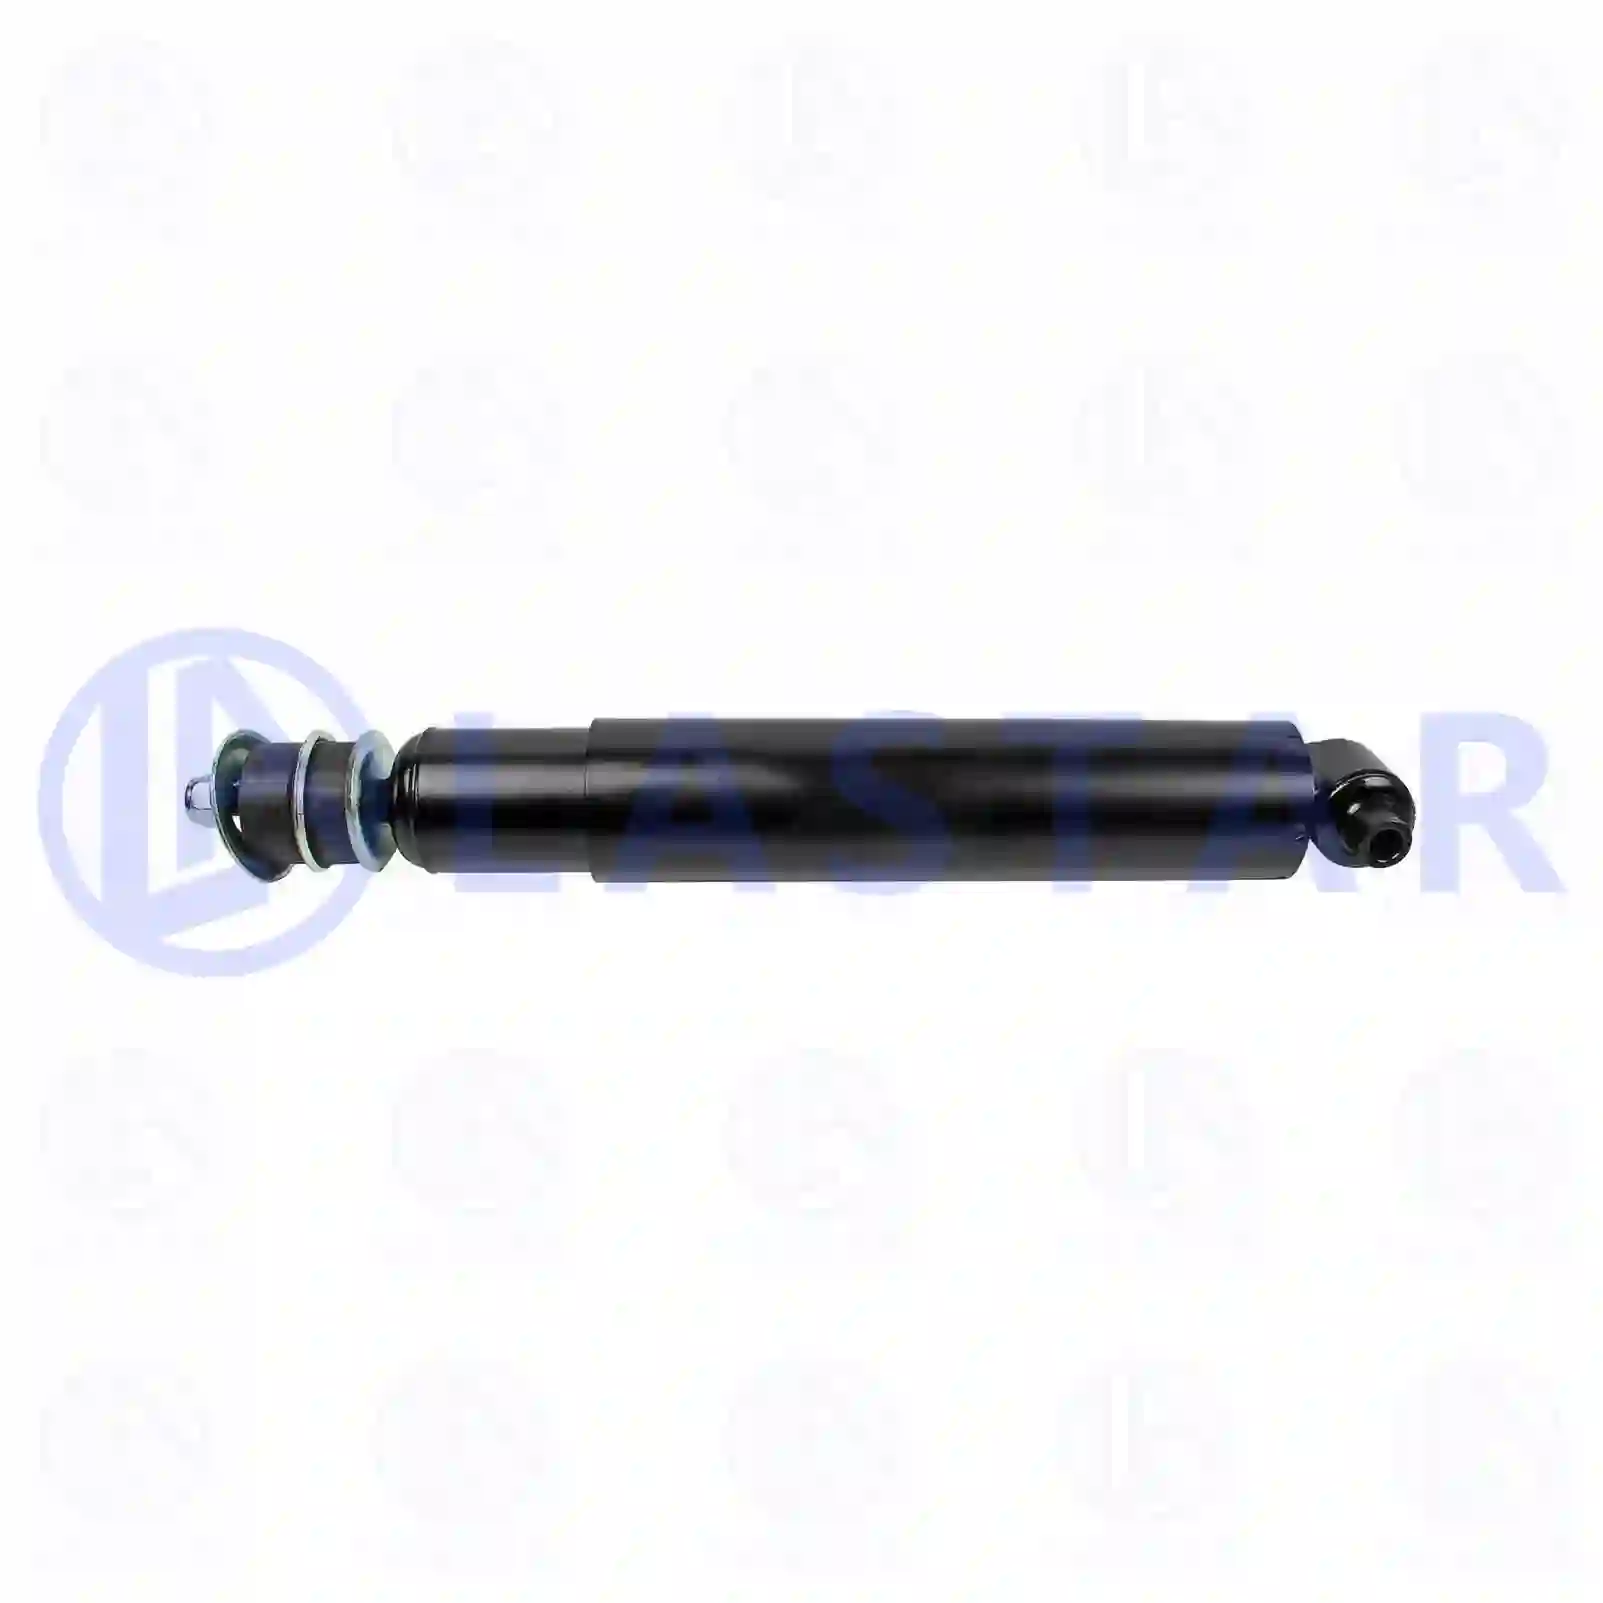 Shock absorber, 77729725, 1628103, 1628136, 1629483, , , , ||  77729725 Lastar Spare Part | Truck Spare Parts, Auotomotive Spare Parts Shock absorber, 77729725, 1628103, 1628136, 1629483, , , , ||  77729725 Lastar Spare Part | Truck Spare Parts, Auotomotive Spare Parts